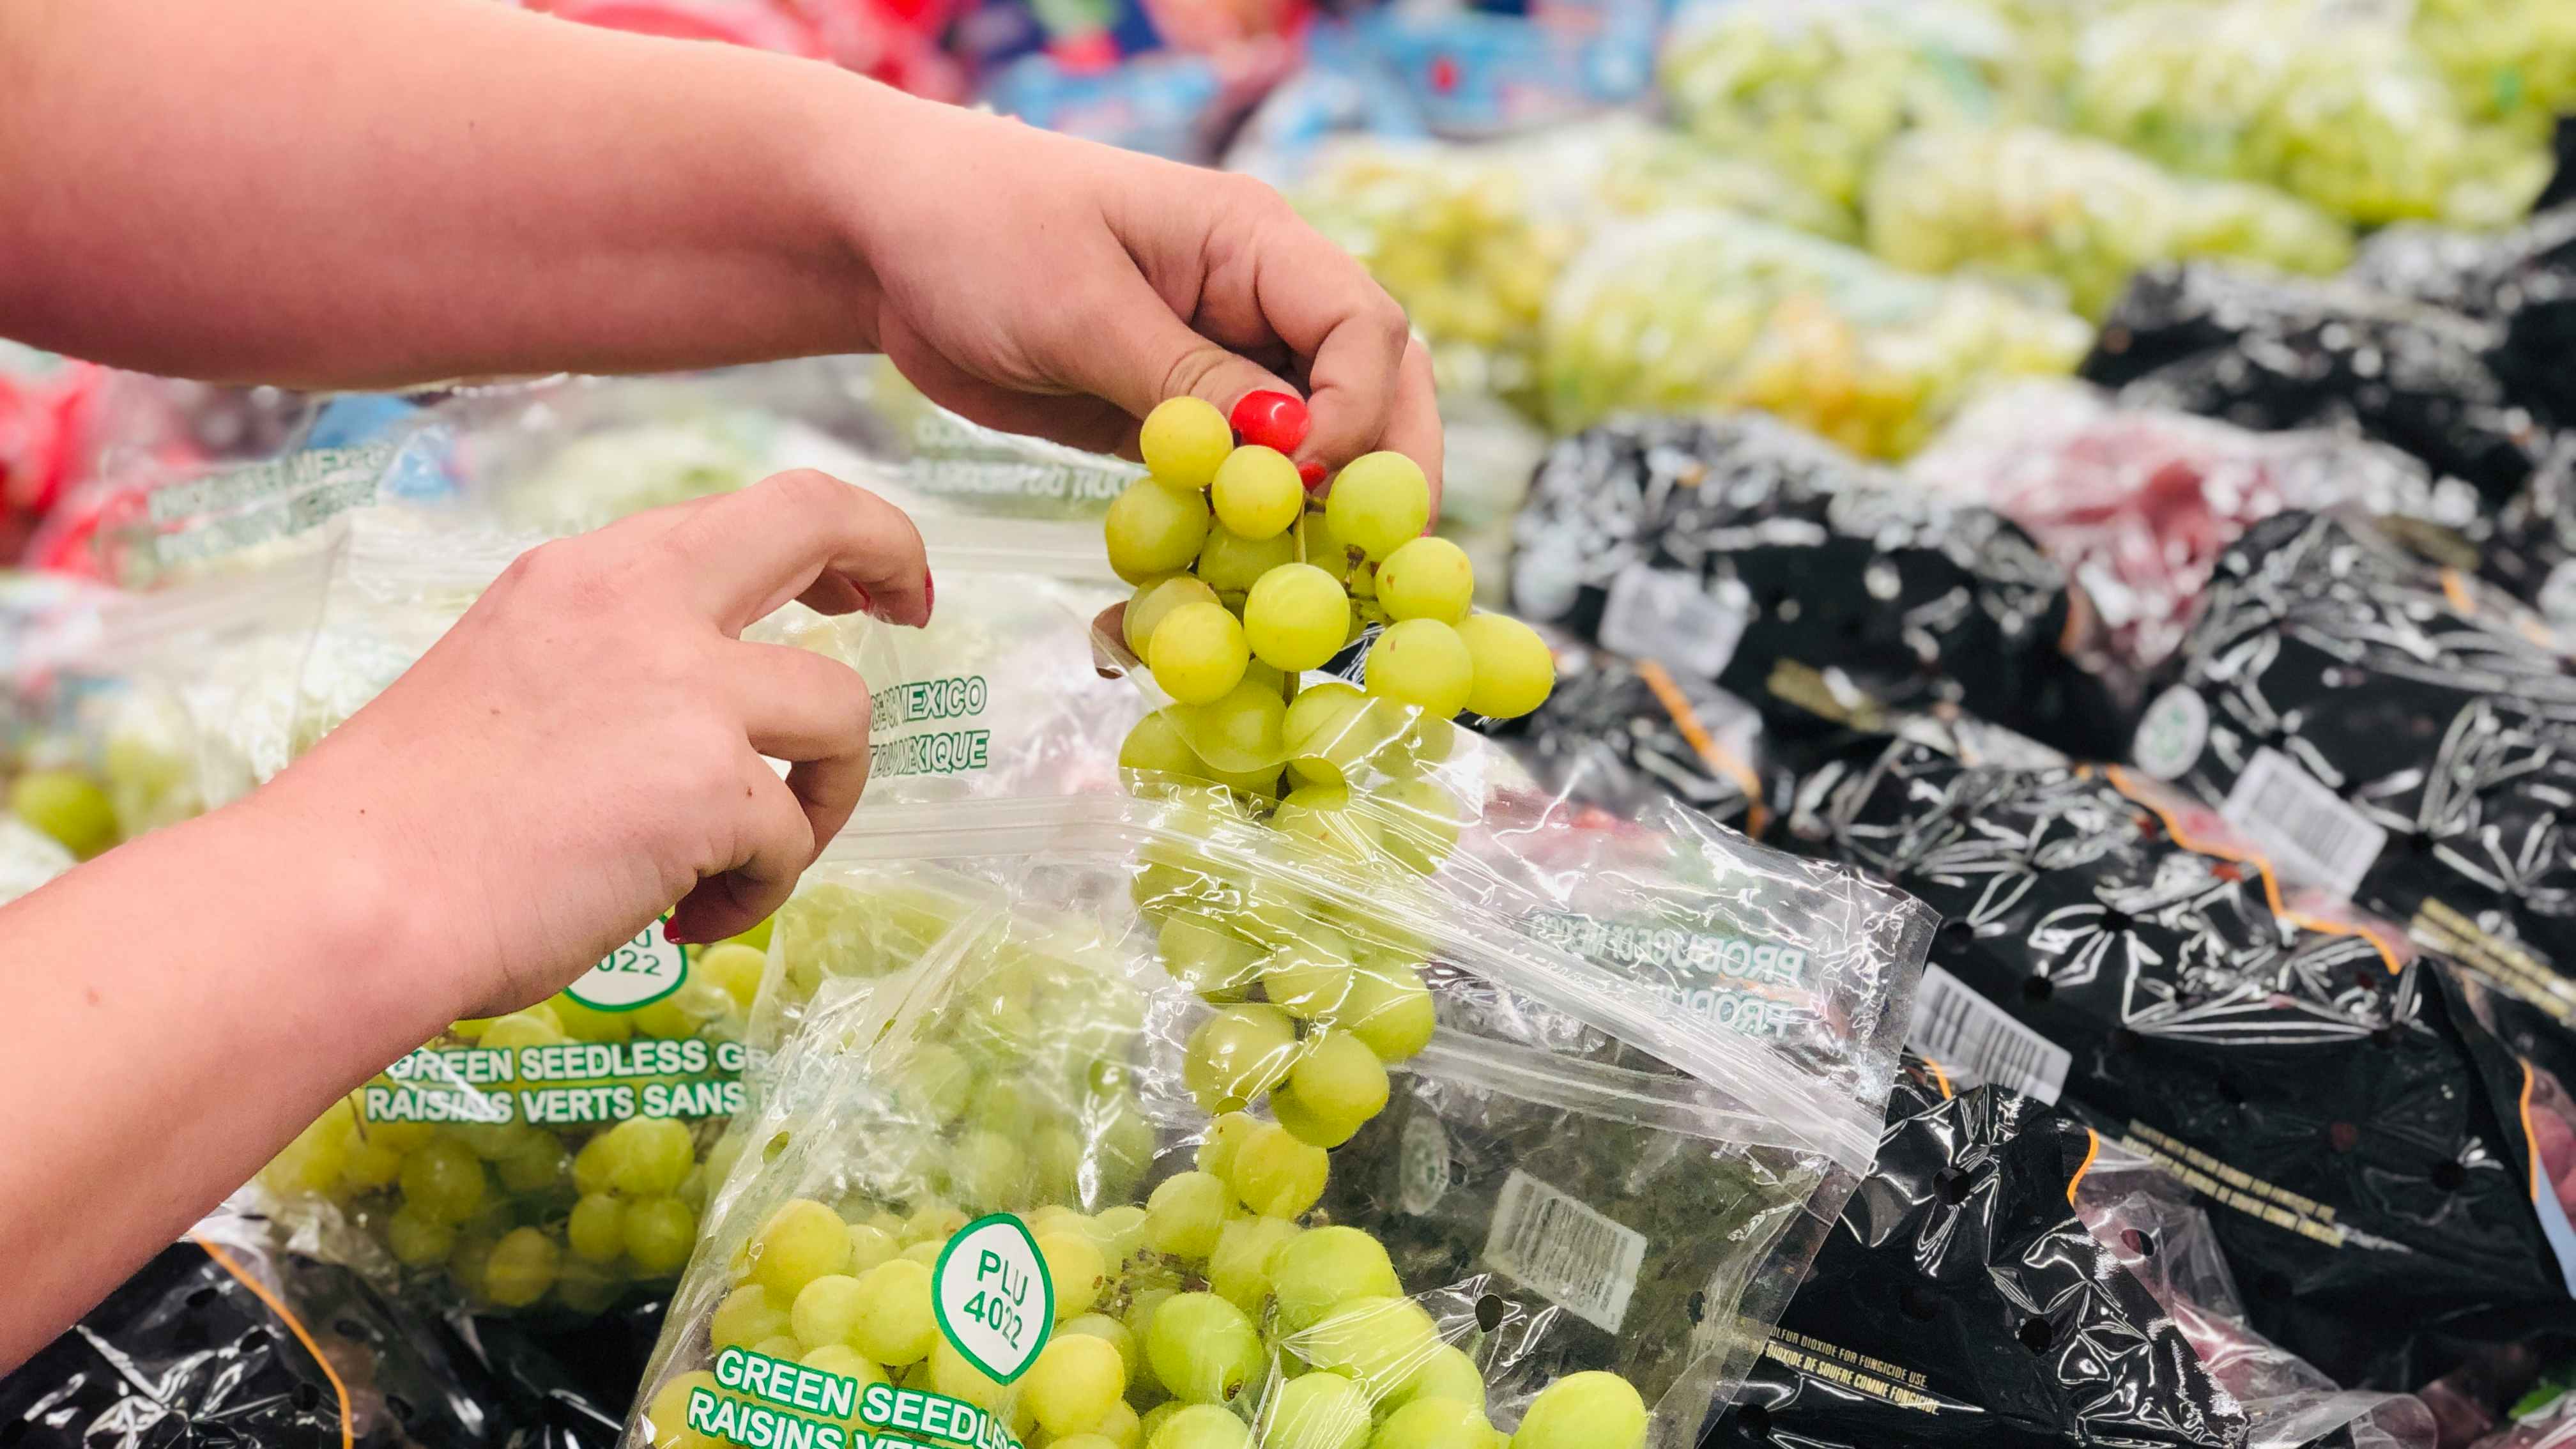 Packaging grapes in bags makes you think you have to buy the whole thing — you don't!